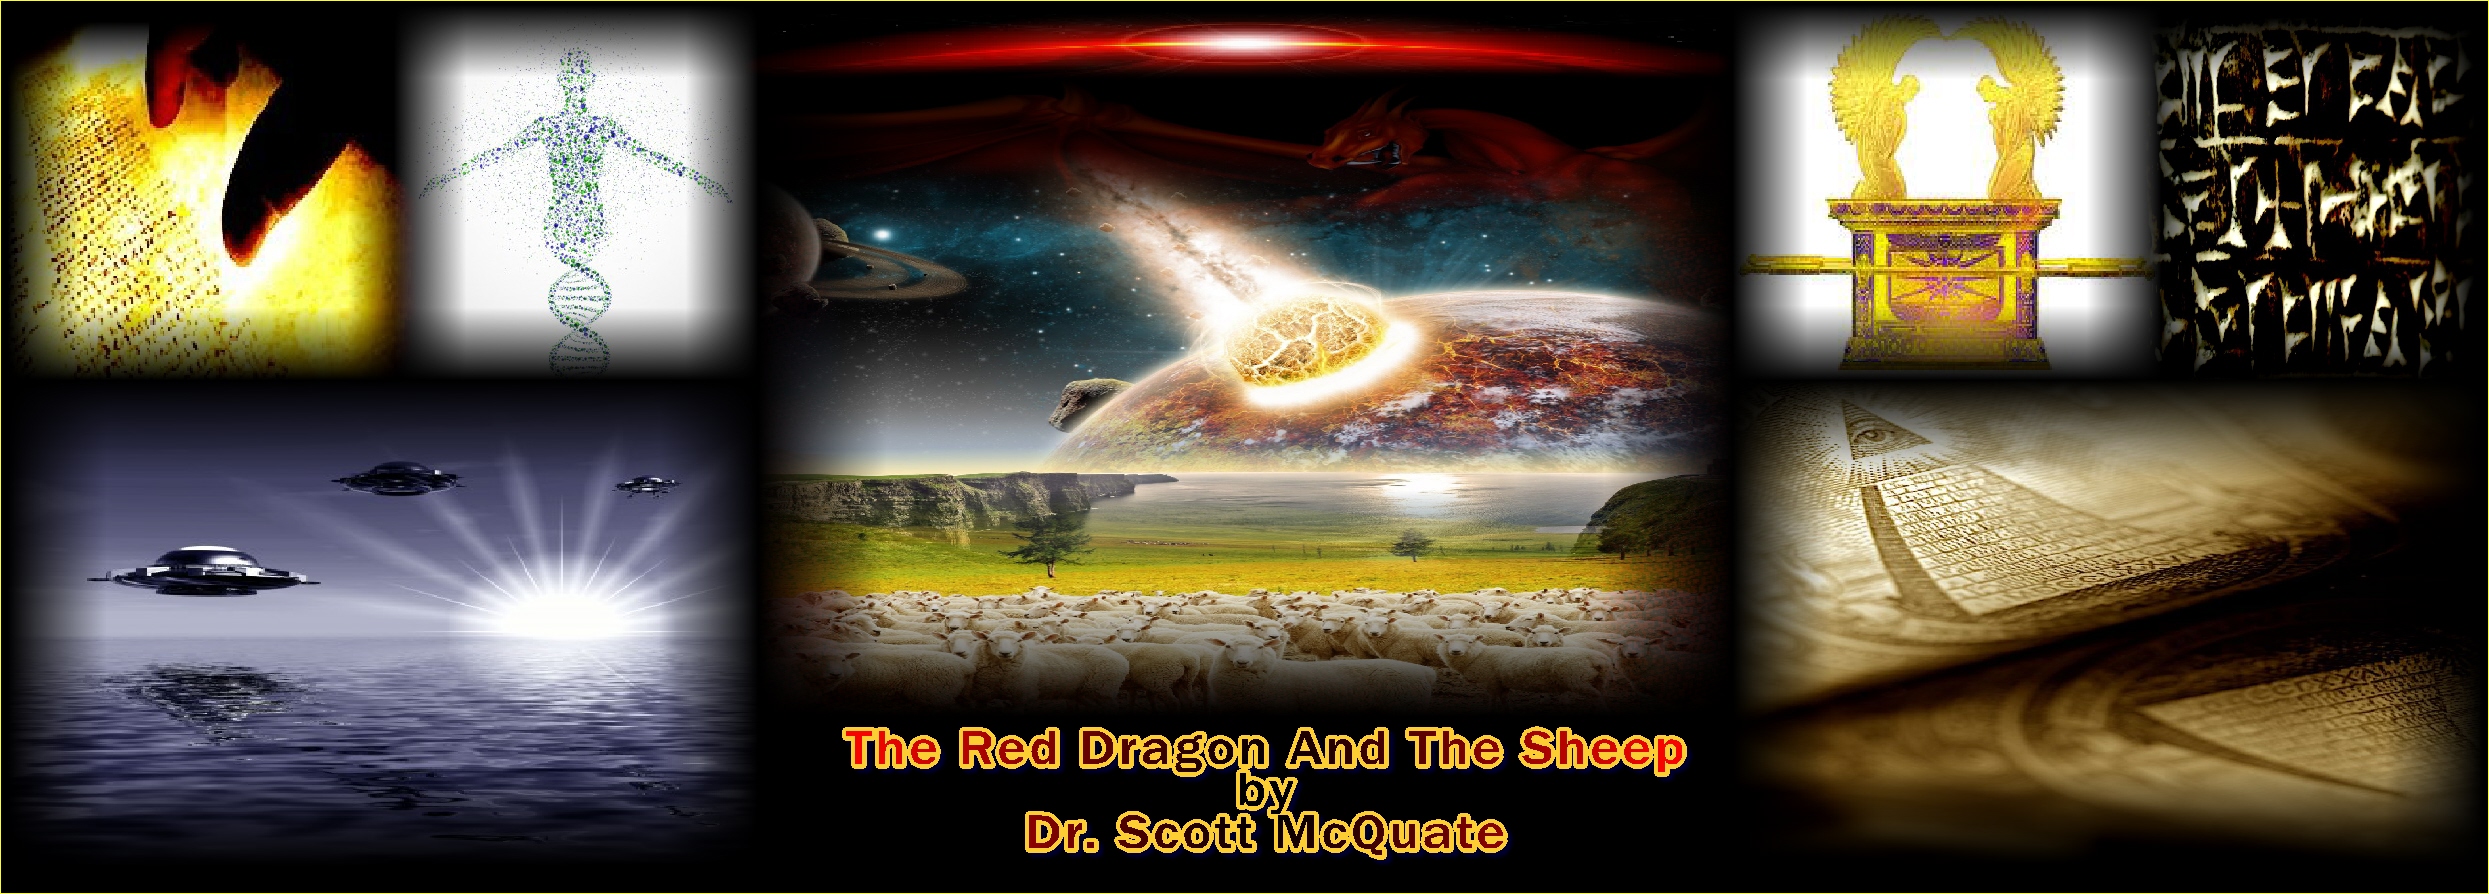 The Red Dragon And The Sheep By Dr. Scott McQuate